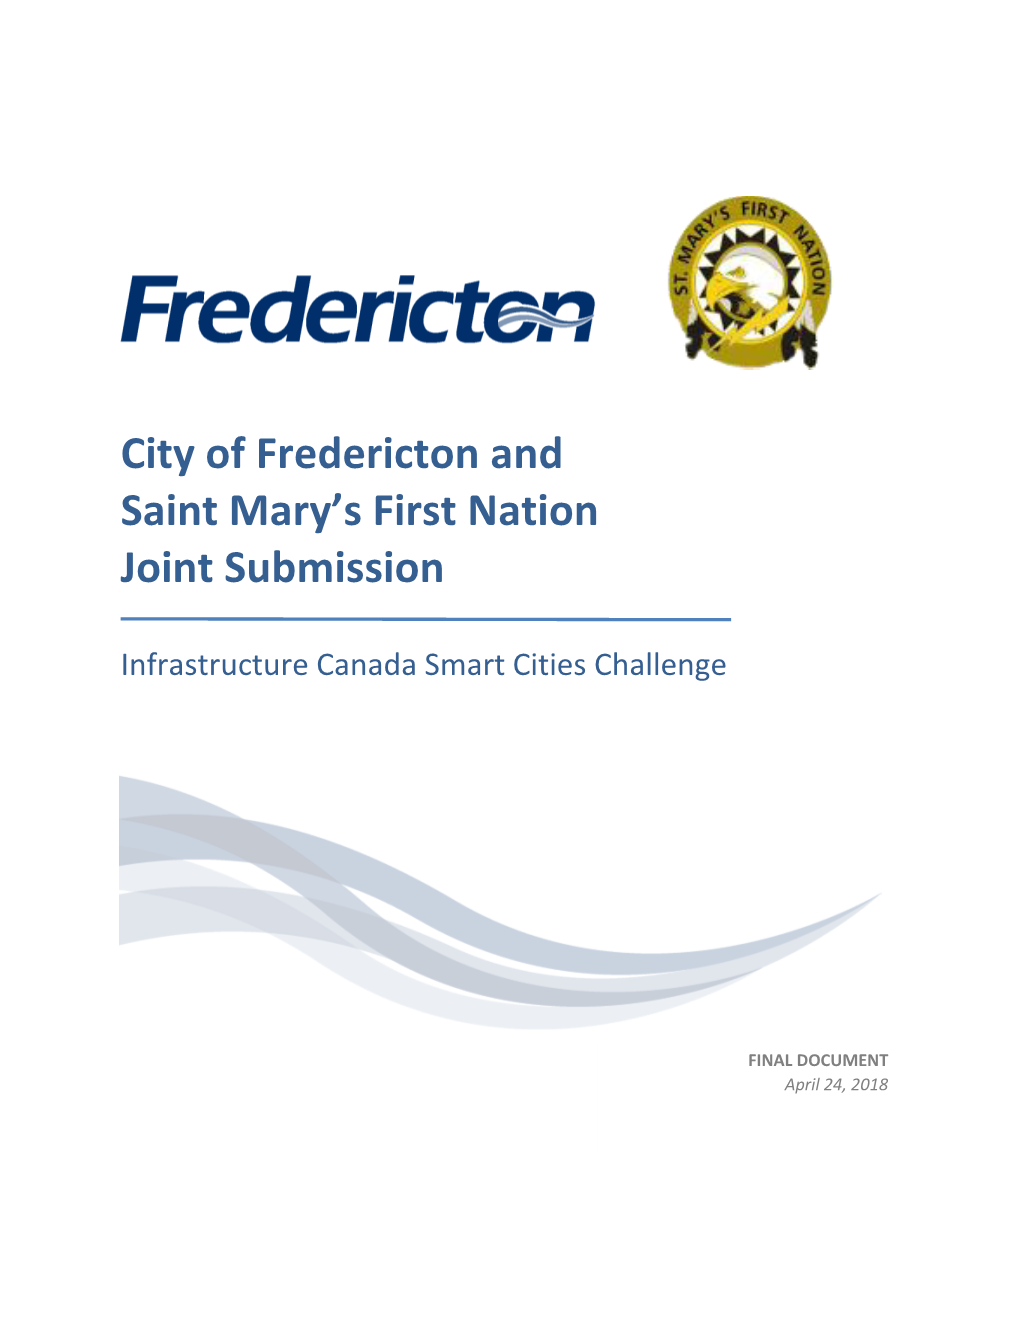 City of Fredericton and Saint Mary's First Nation Joint Submission